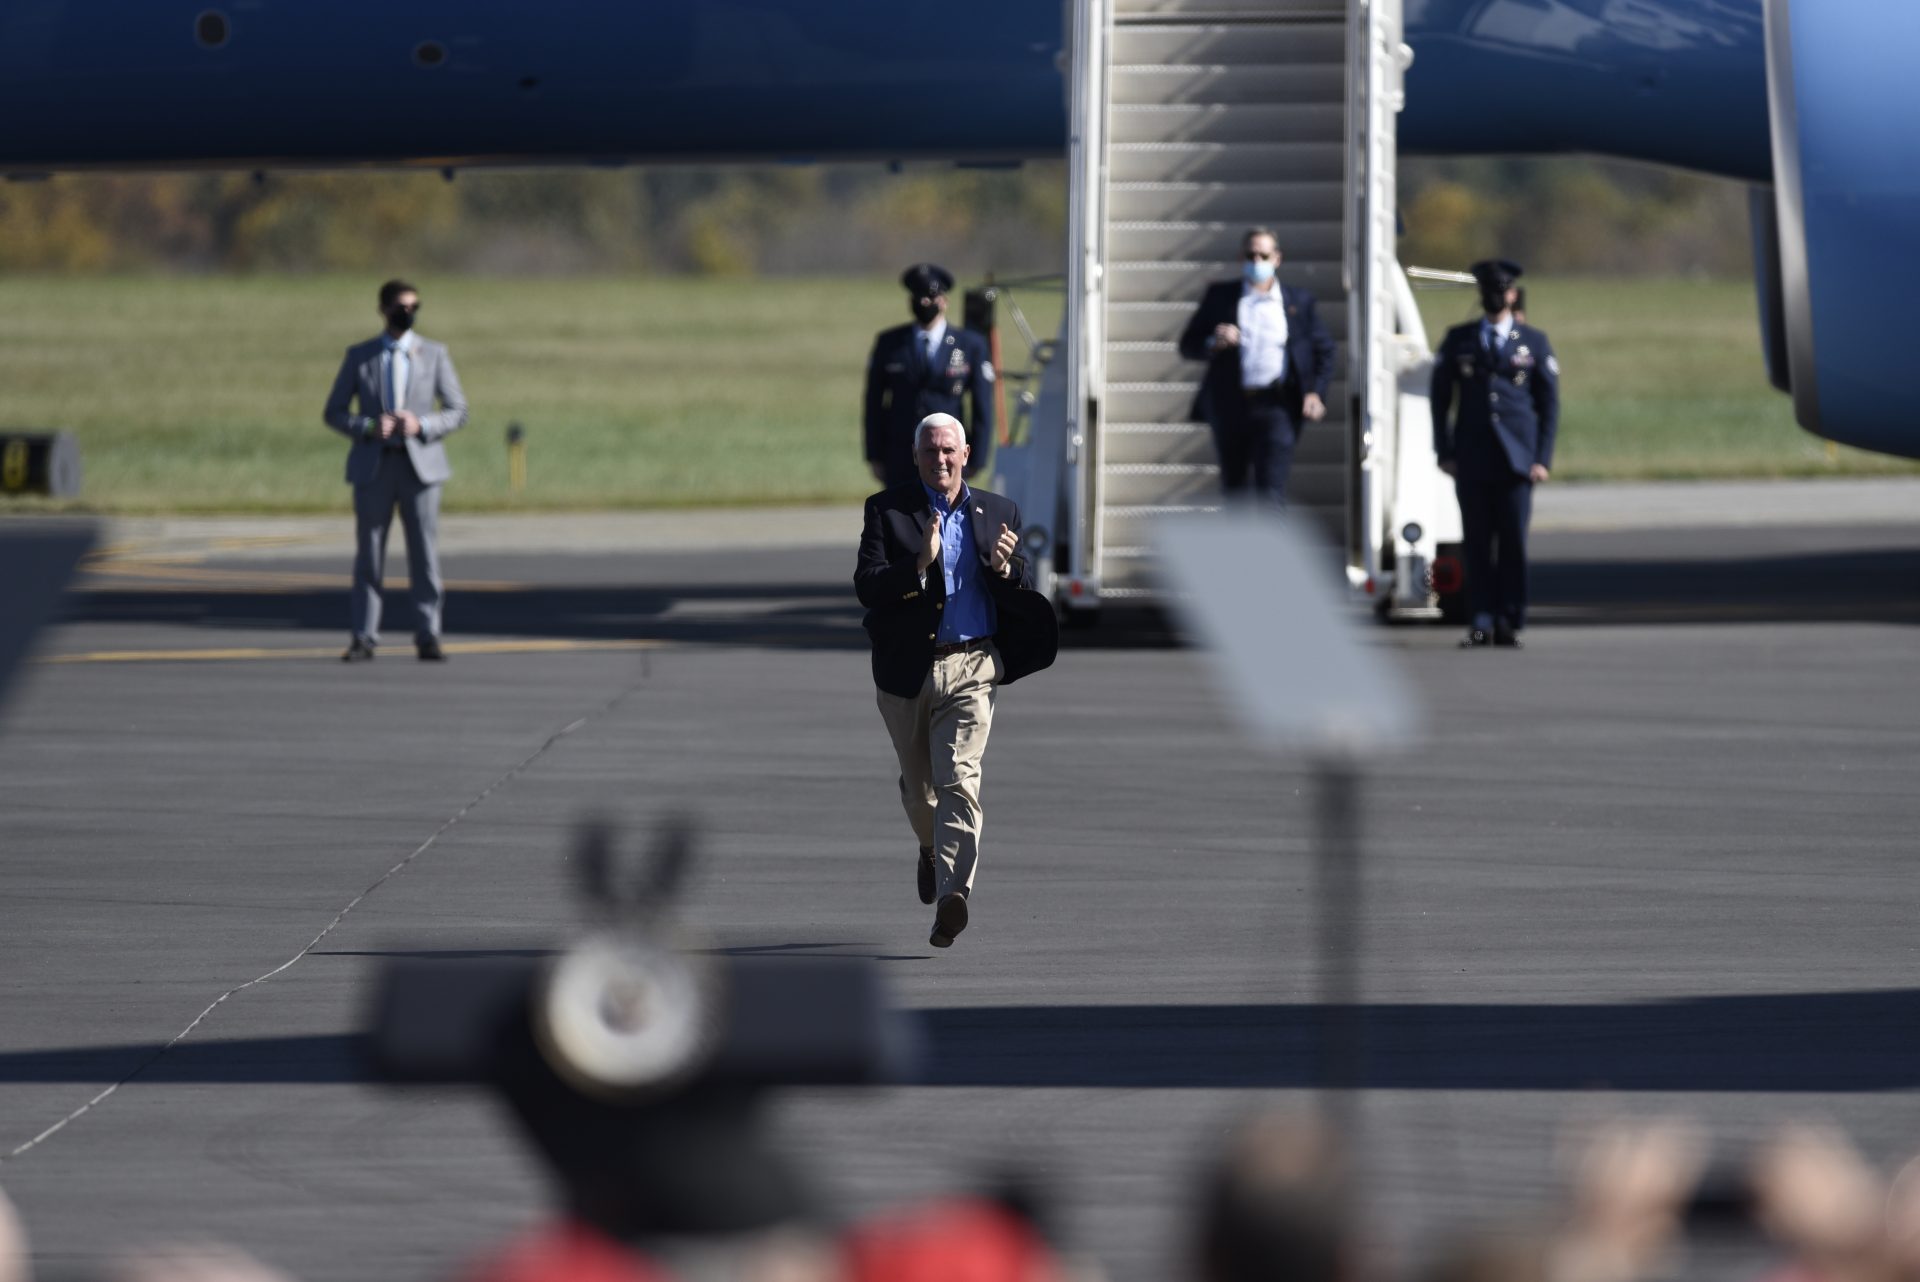 Vice President Mike Pence arrives at a campaign rally held at the Reading Regional Airport, Saturday, Oct. 17, 2020, in Reading, Pa.